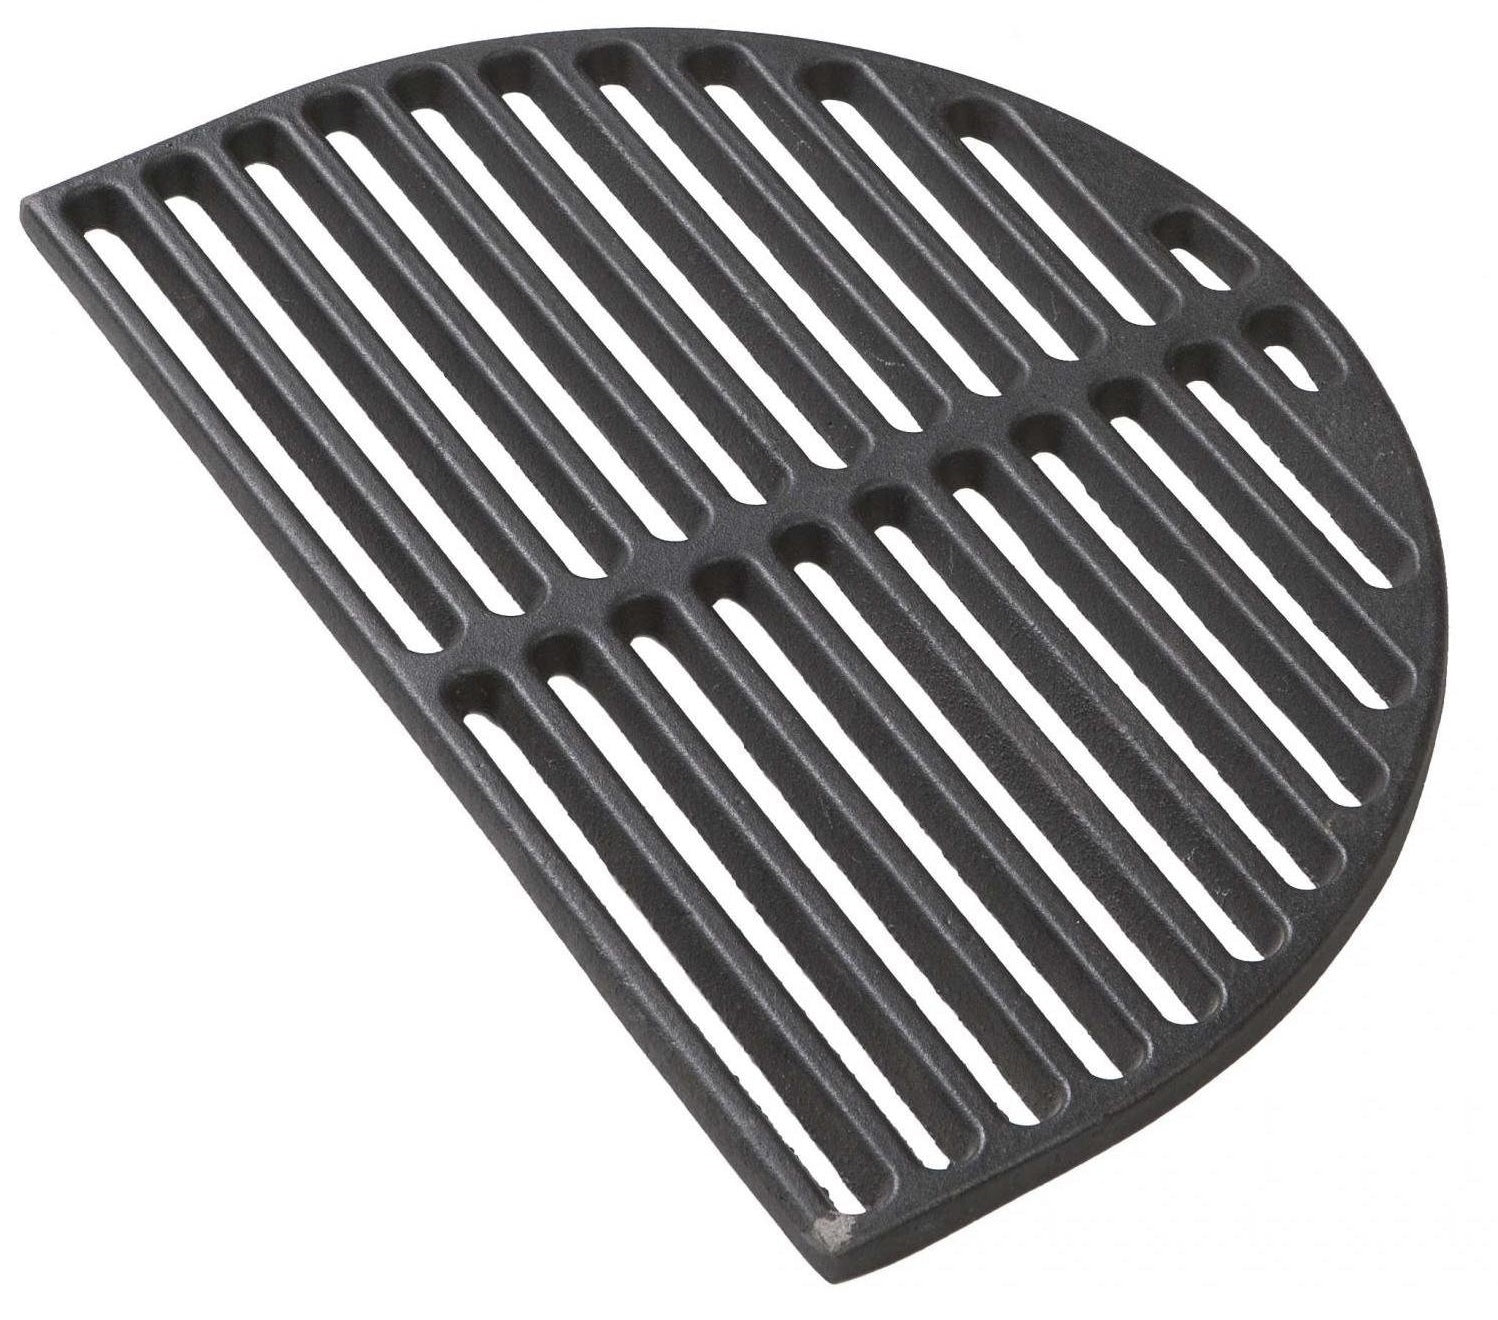 Primo 361 Cast Iron Cooking Grate